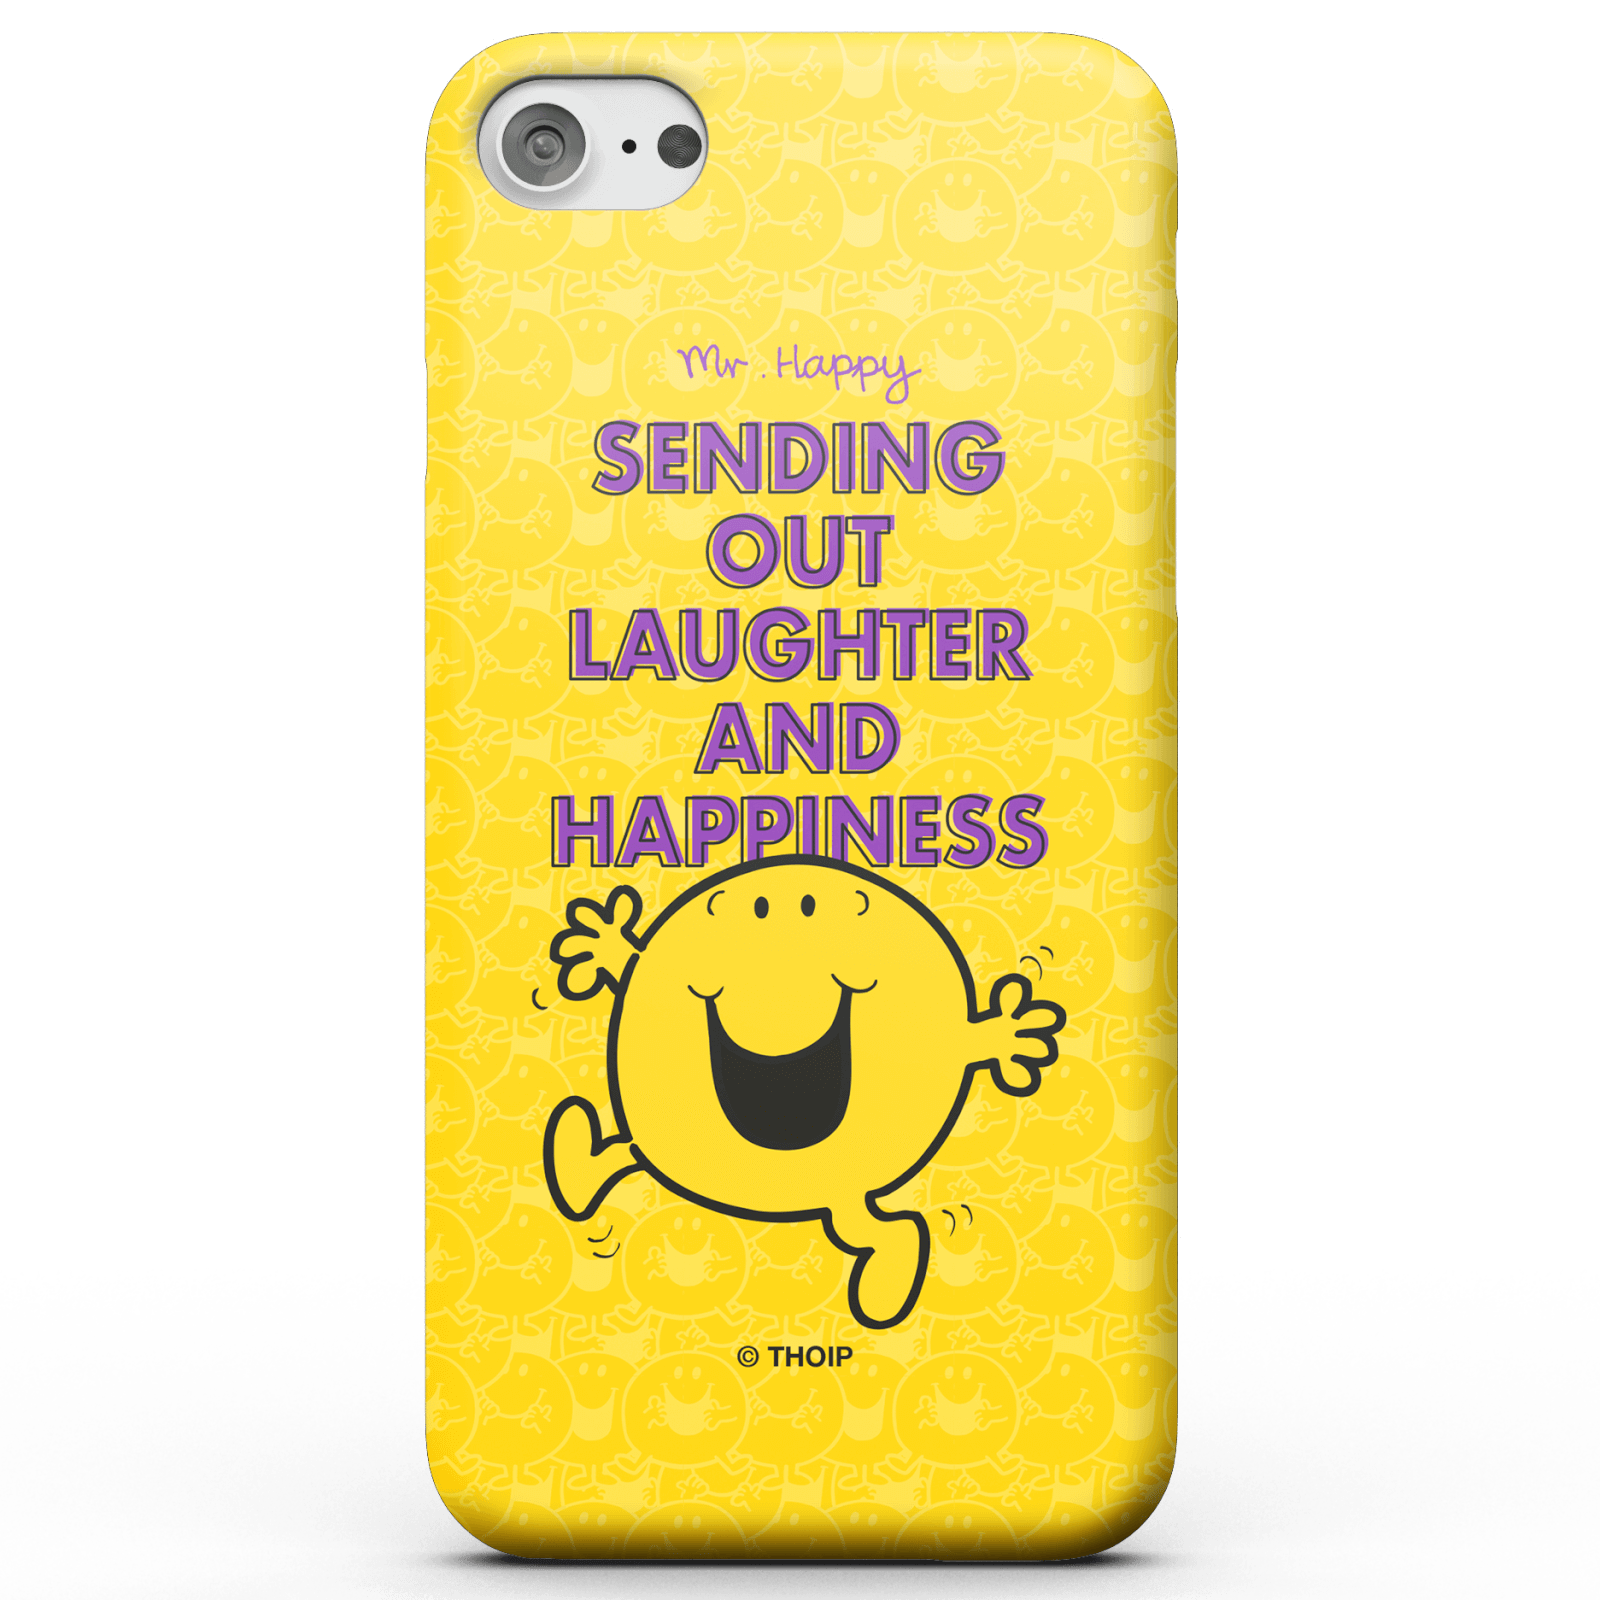 Mr Men & Little Miss Mr. Happy Sending Out Laughter And Happiness Phone Case for iPhone and Android - iPhone 5/5s - Snap Case - Matte